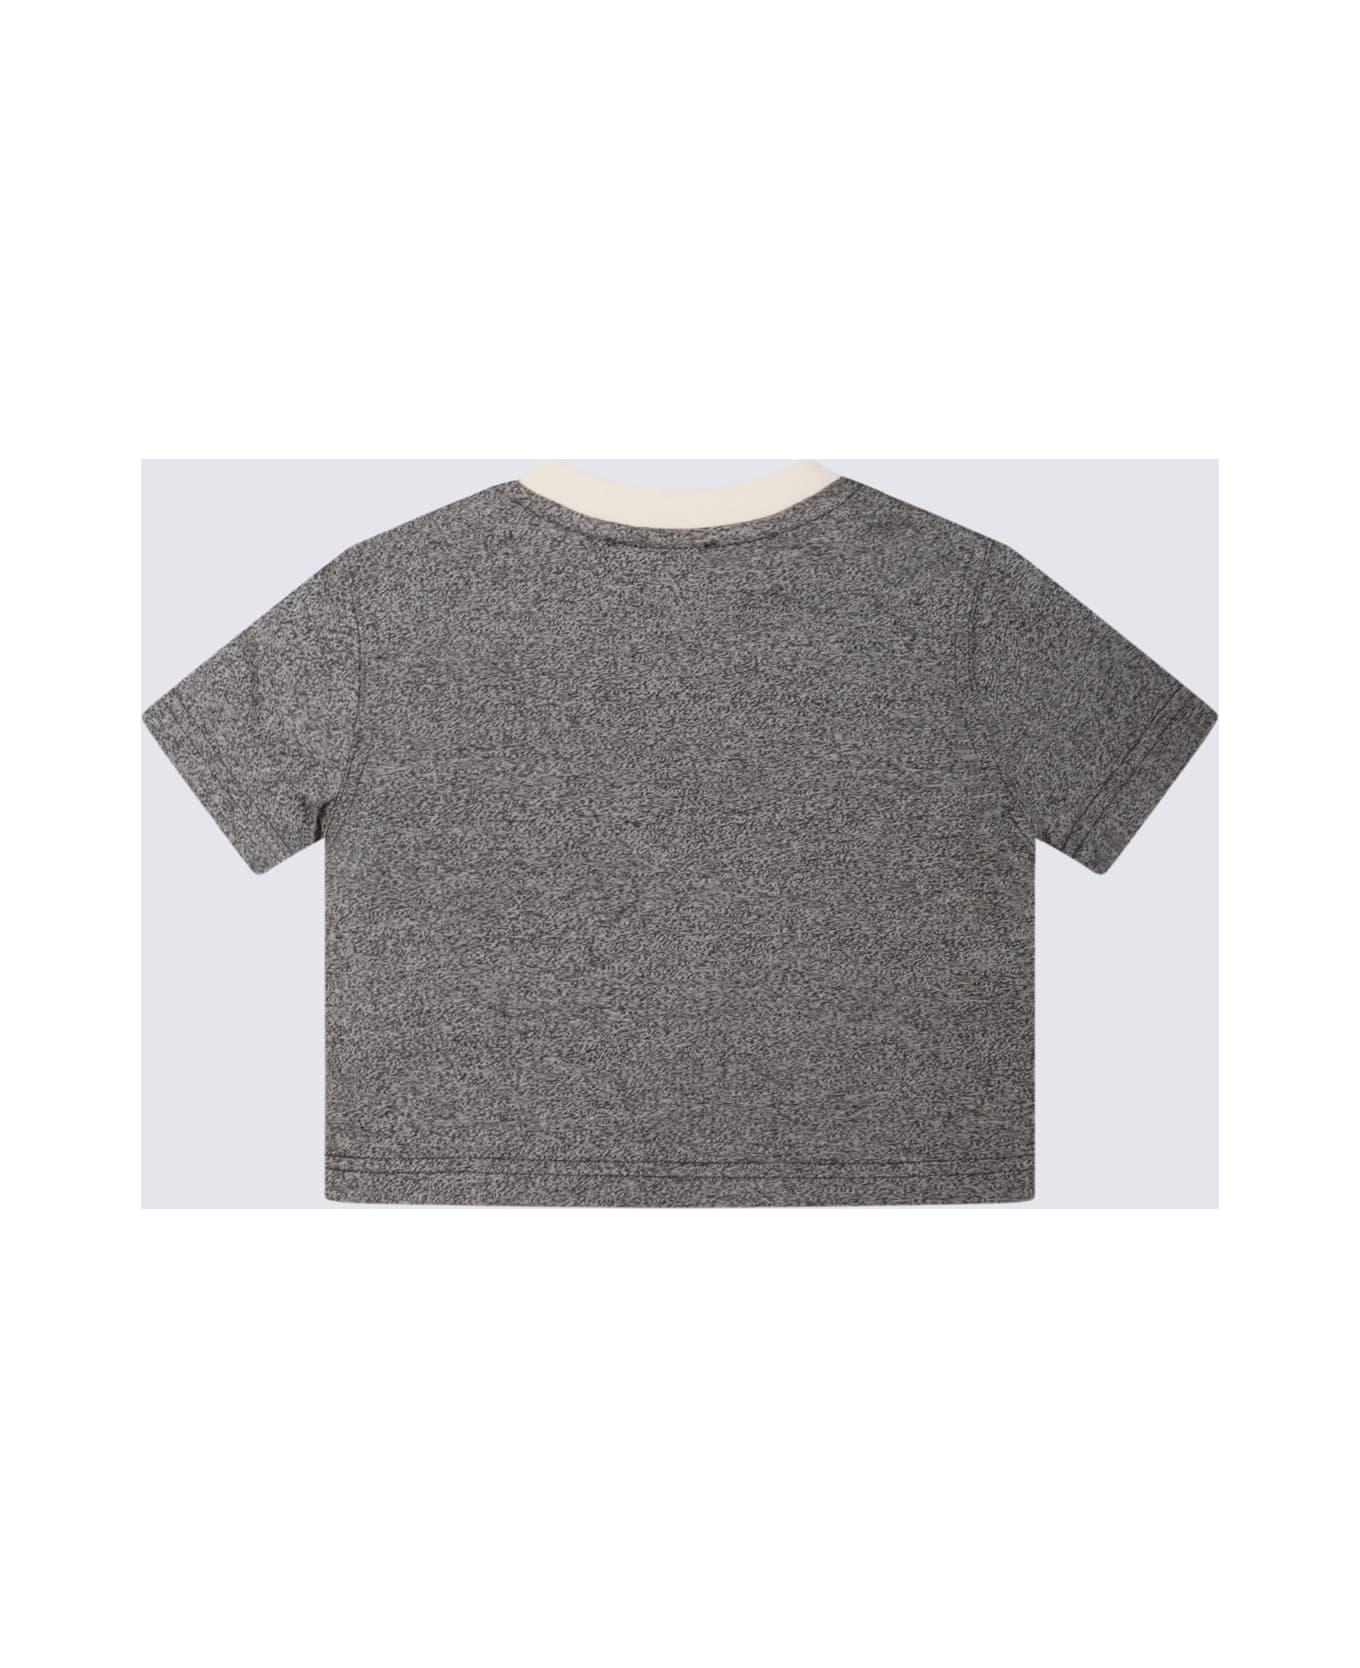 Burberry Grey And White and T-shirt - CHARCOAL GREY MELANG